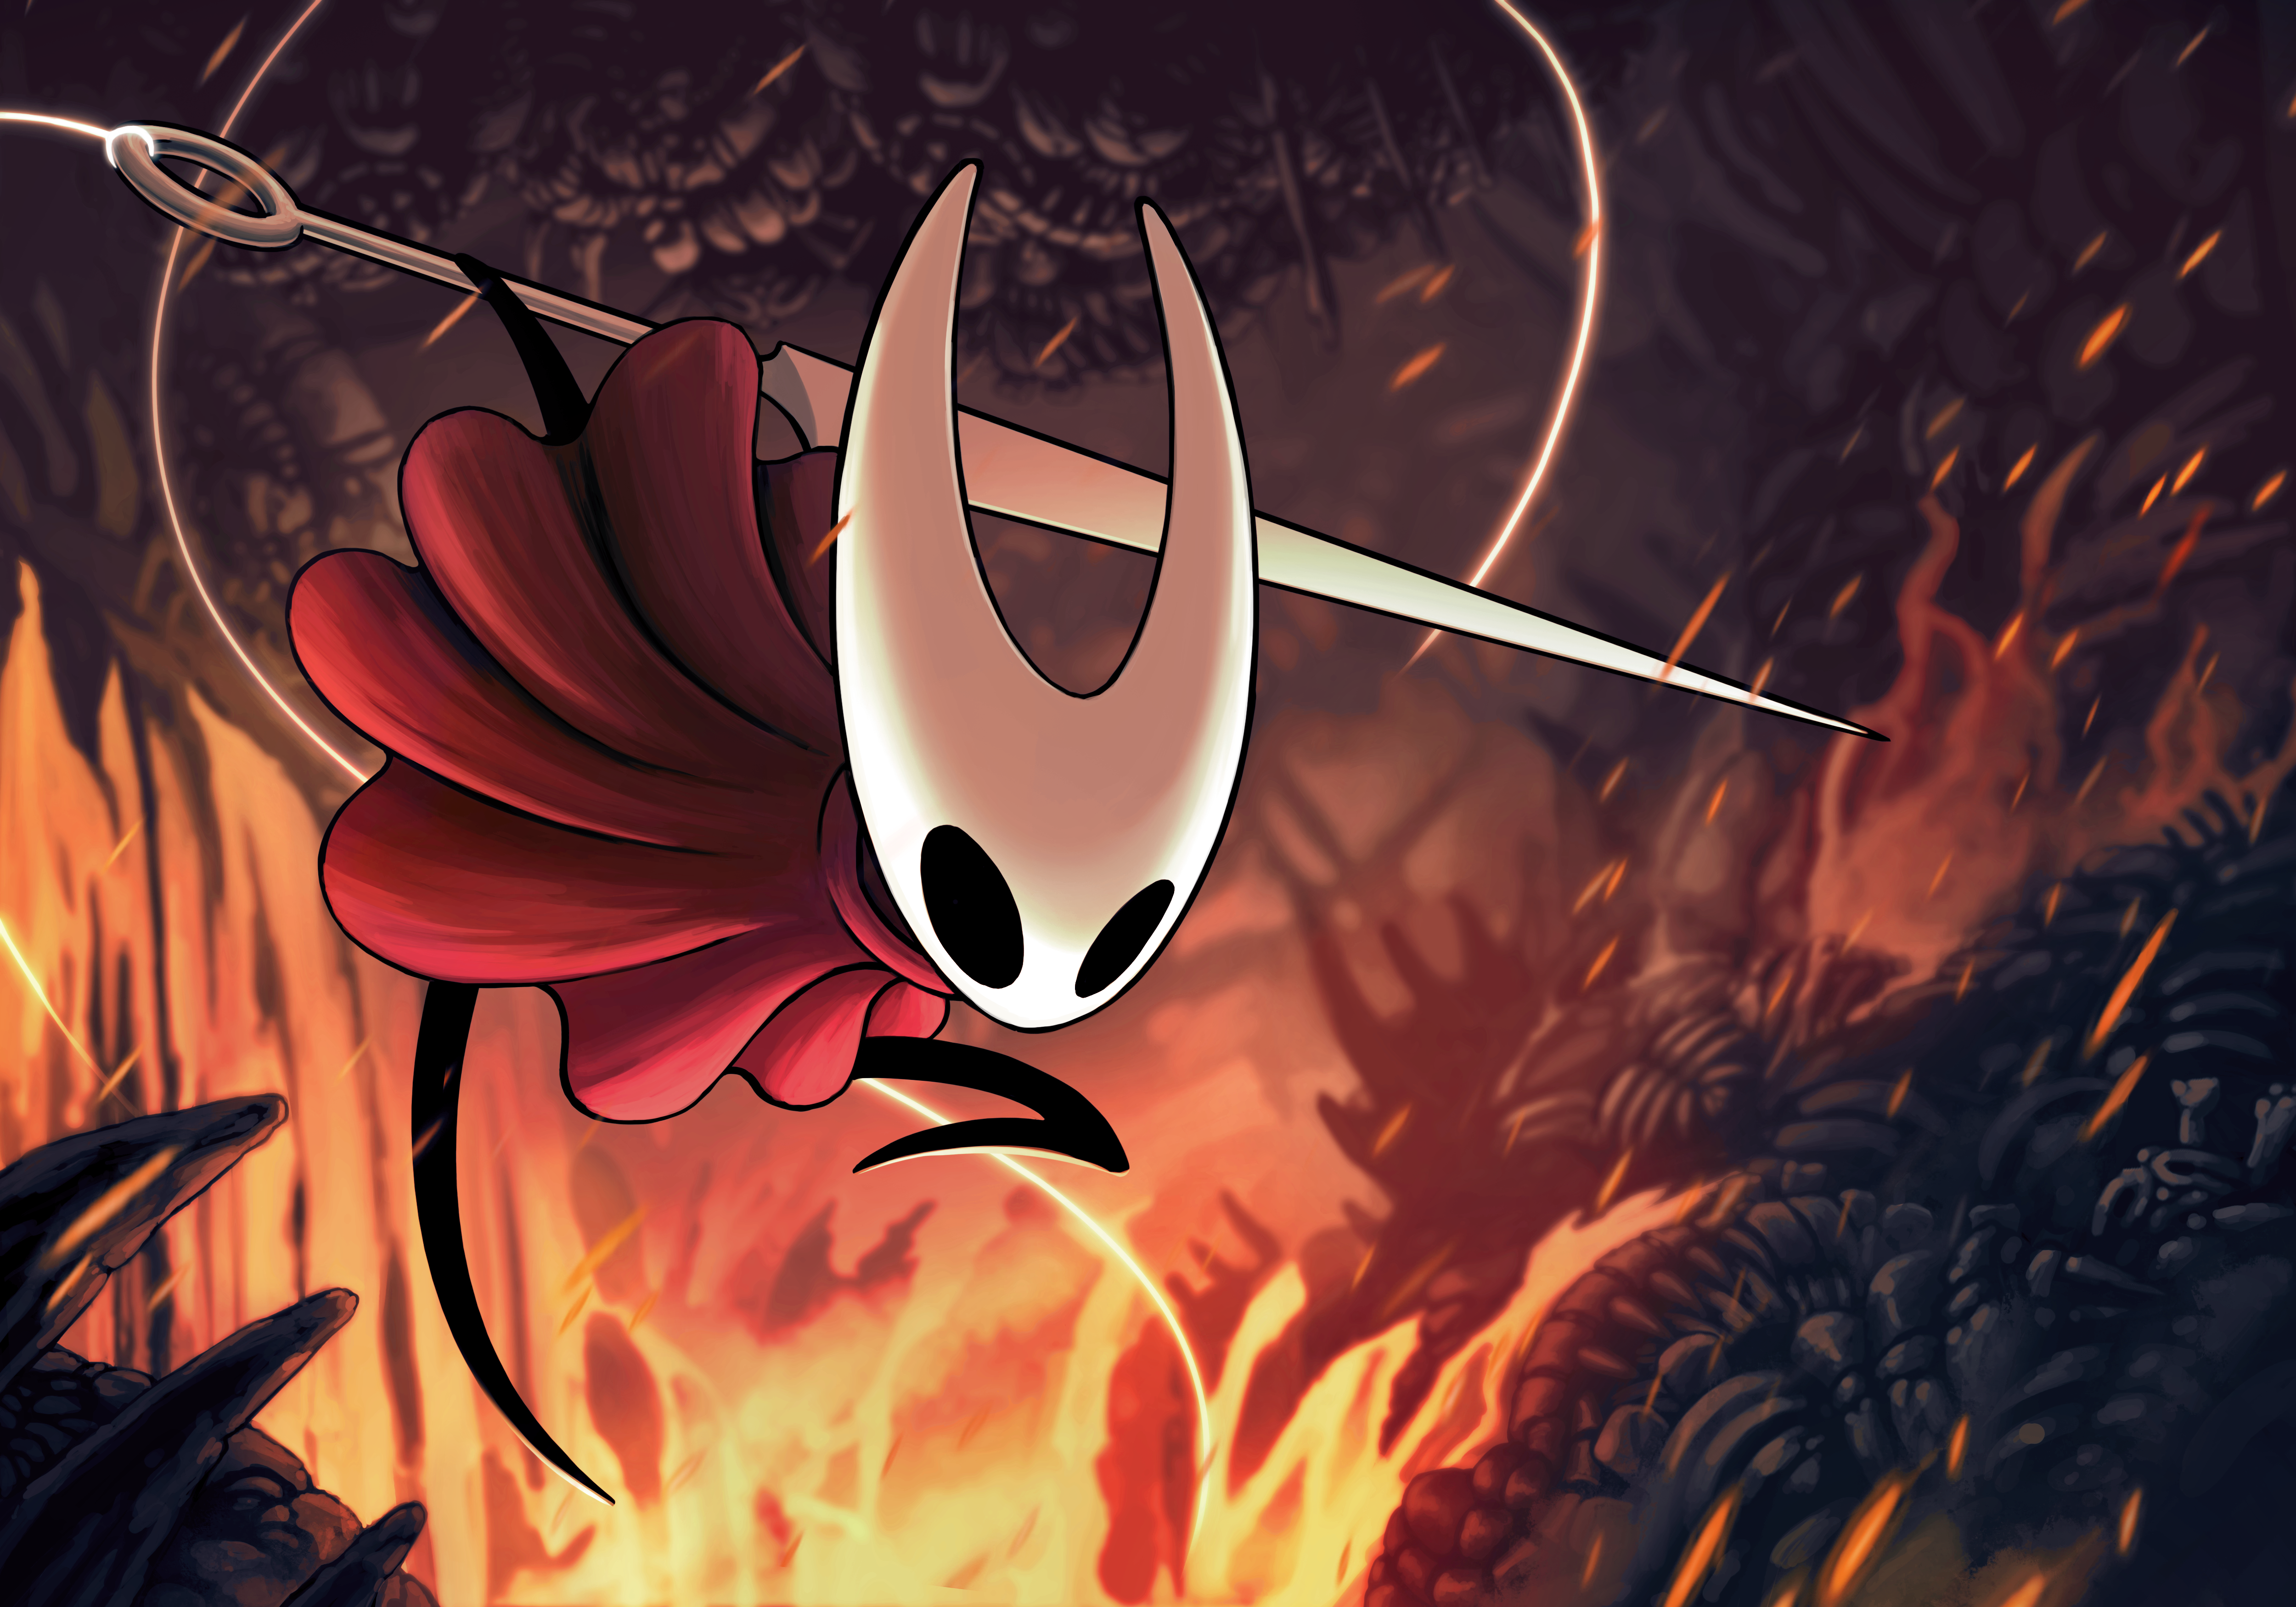 Pictures of Hollow Knight Silksong revealed to be sequel not DLC 15